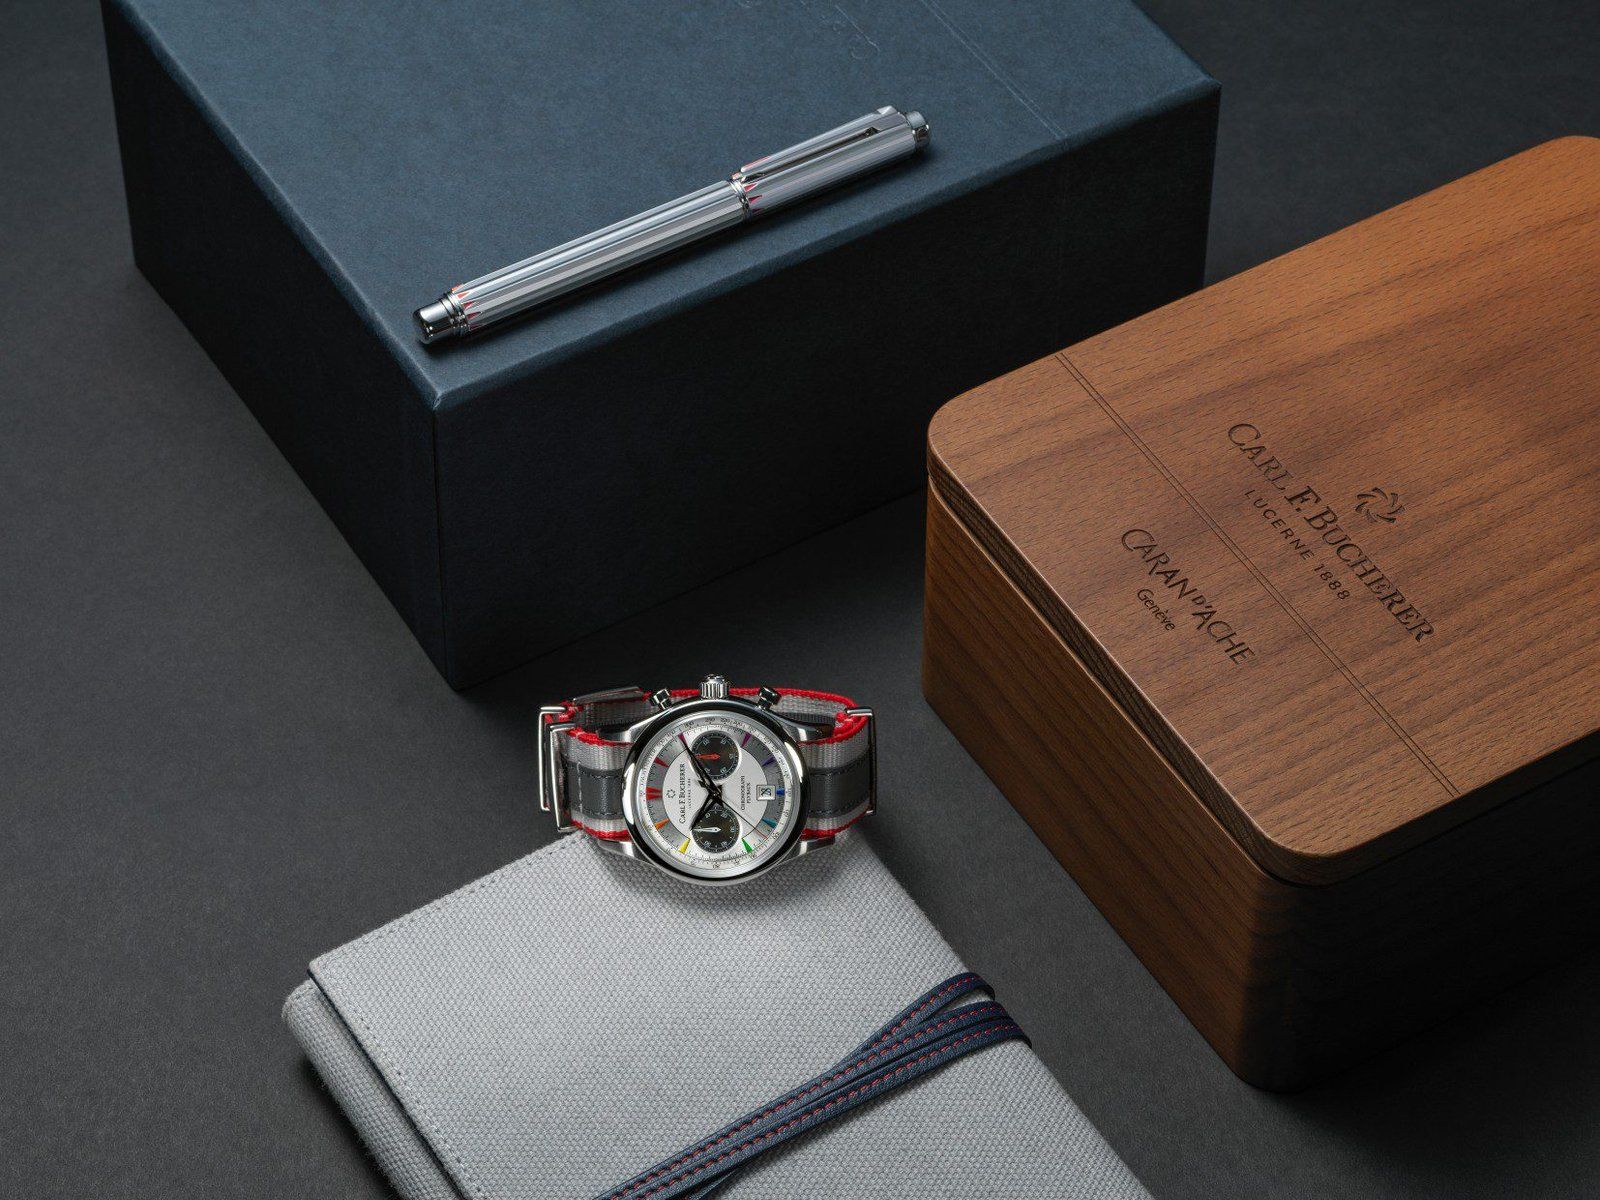 Carl F. Bucherer Manero Flyback Signature watch and the Caran d'Ache Signature rollerball pen.